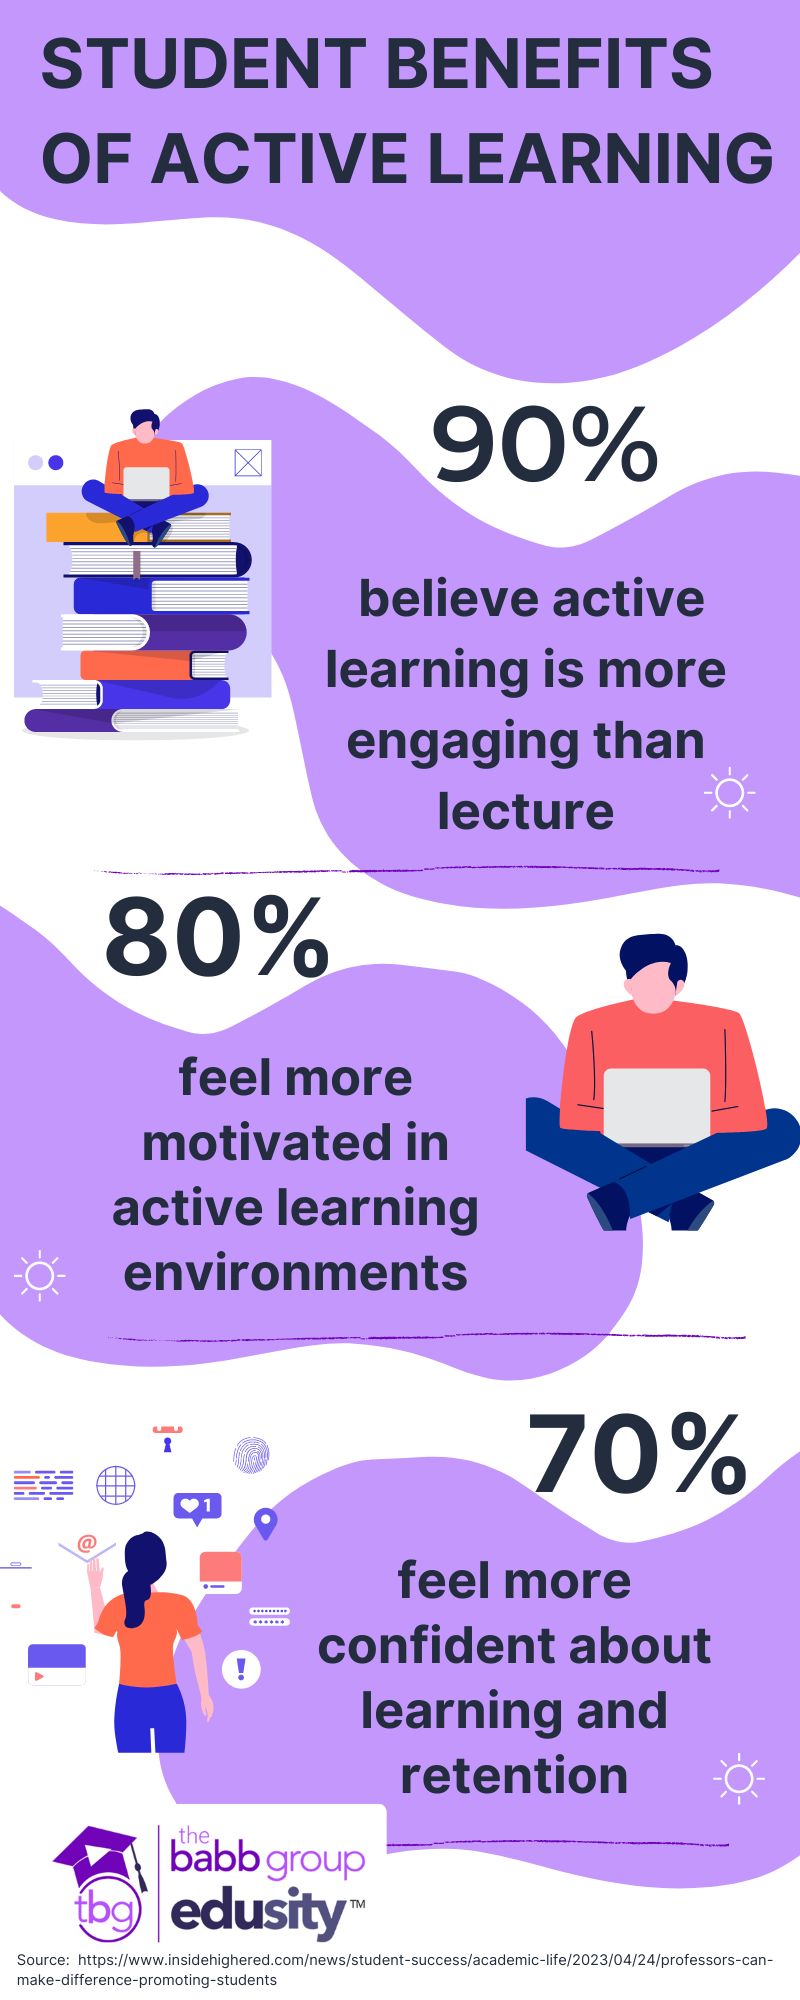 Nearly 90% of respondents believed active learning environments are more engaging than traditional lecture-based classes. Additionally, over 80% of students reported feeling more motivated to learn in active learning environments, and nearly 70% said they felt more confident in learning and retaining information.